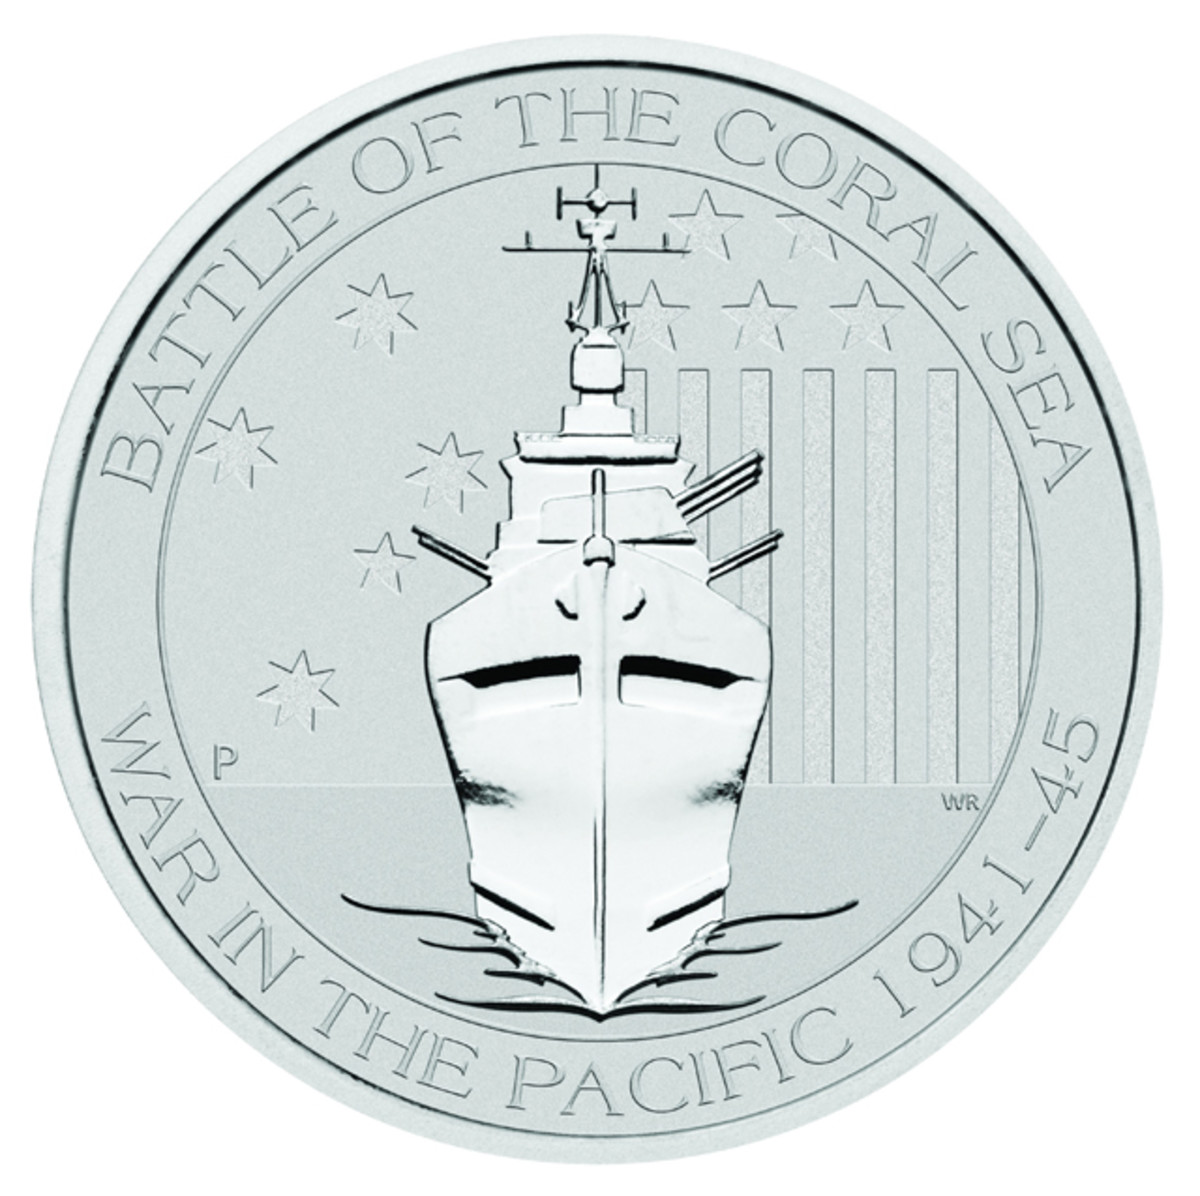 The Battle of the Coral Sea is commemorated by a half-ounce silver 50-cent piece from the Perth Mint.